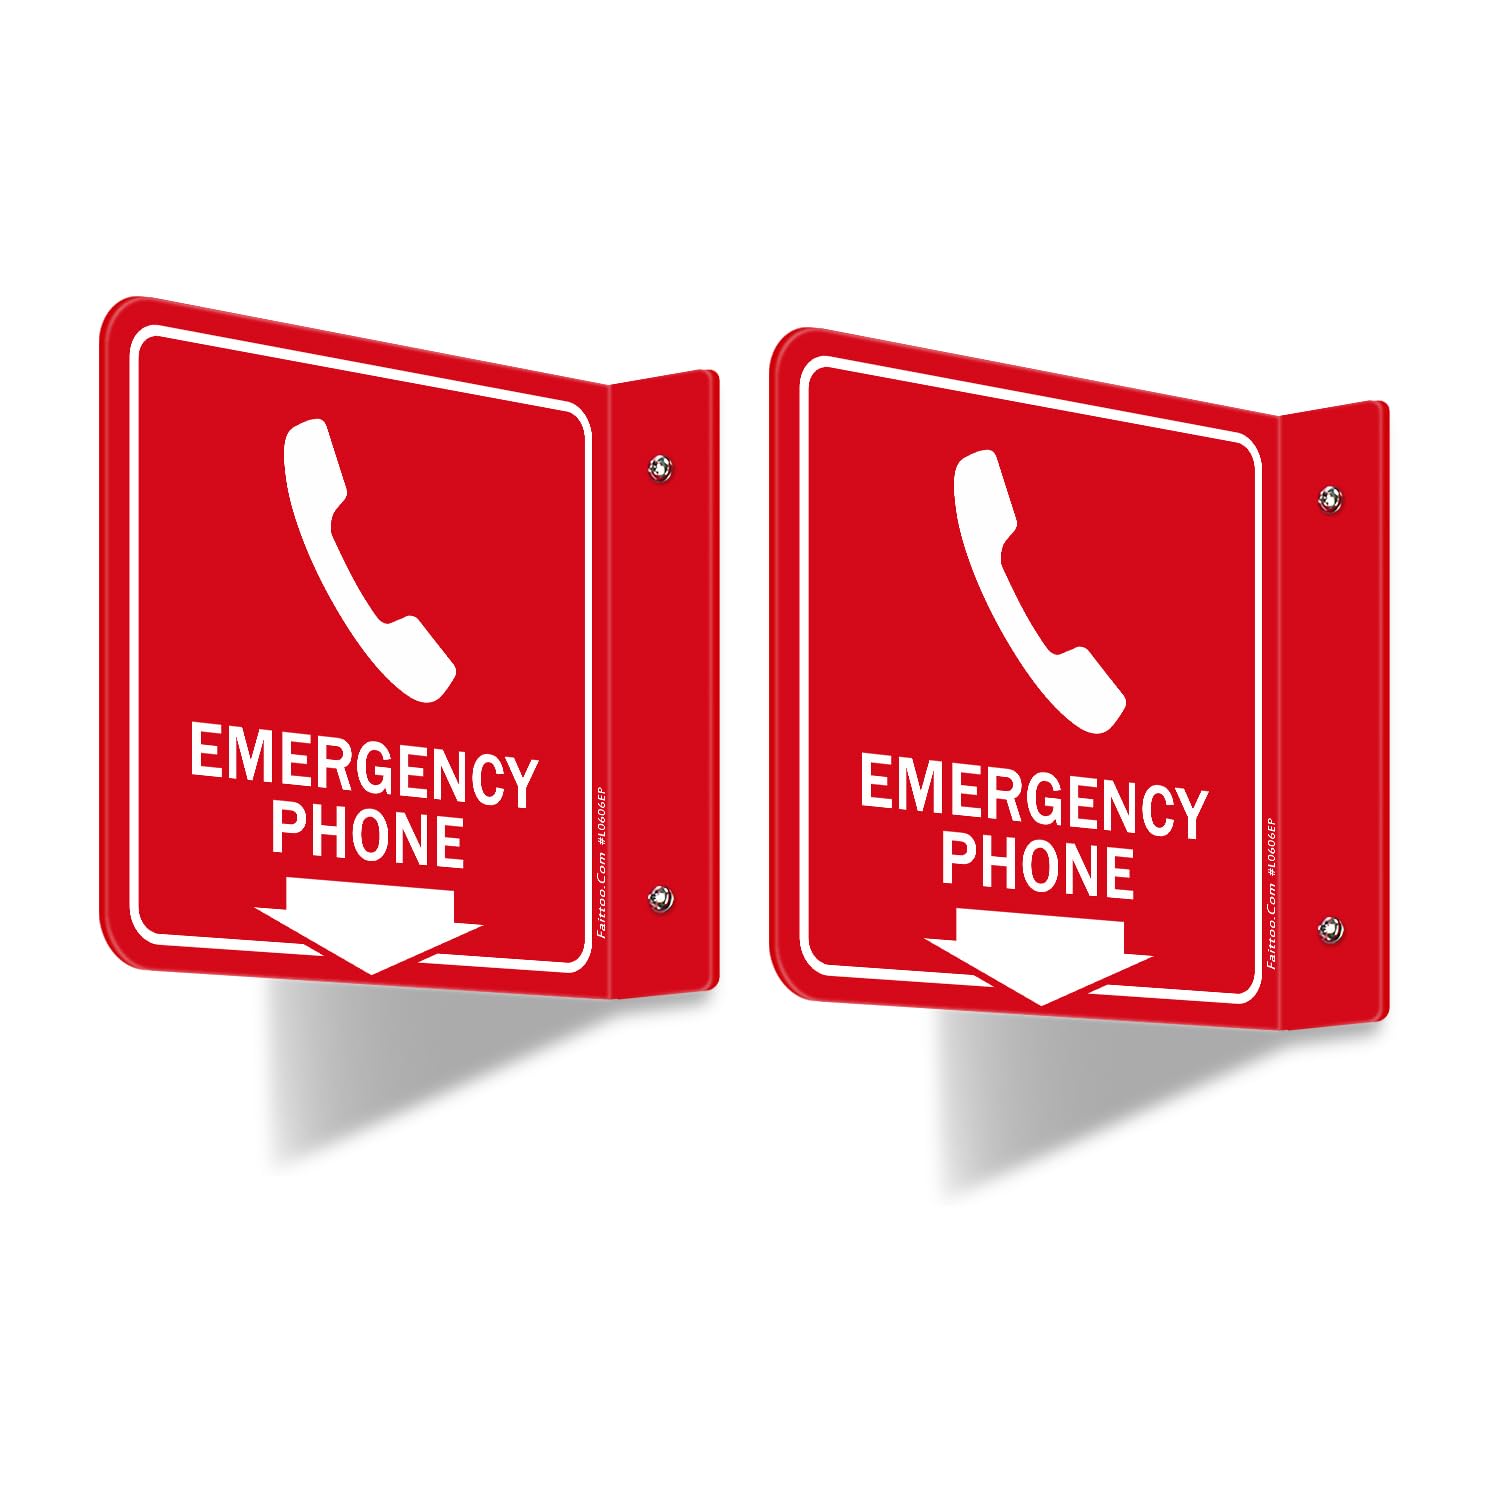 Faittoo Emergency Phone Sign, 2 Pack Emergency Phone with Down Arrow - 6 x 6 Inches Acrylic Plastic, 2 Pre-Drilled Holes, Includes Matching Screws, Use for Home Office/Business